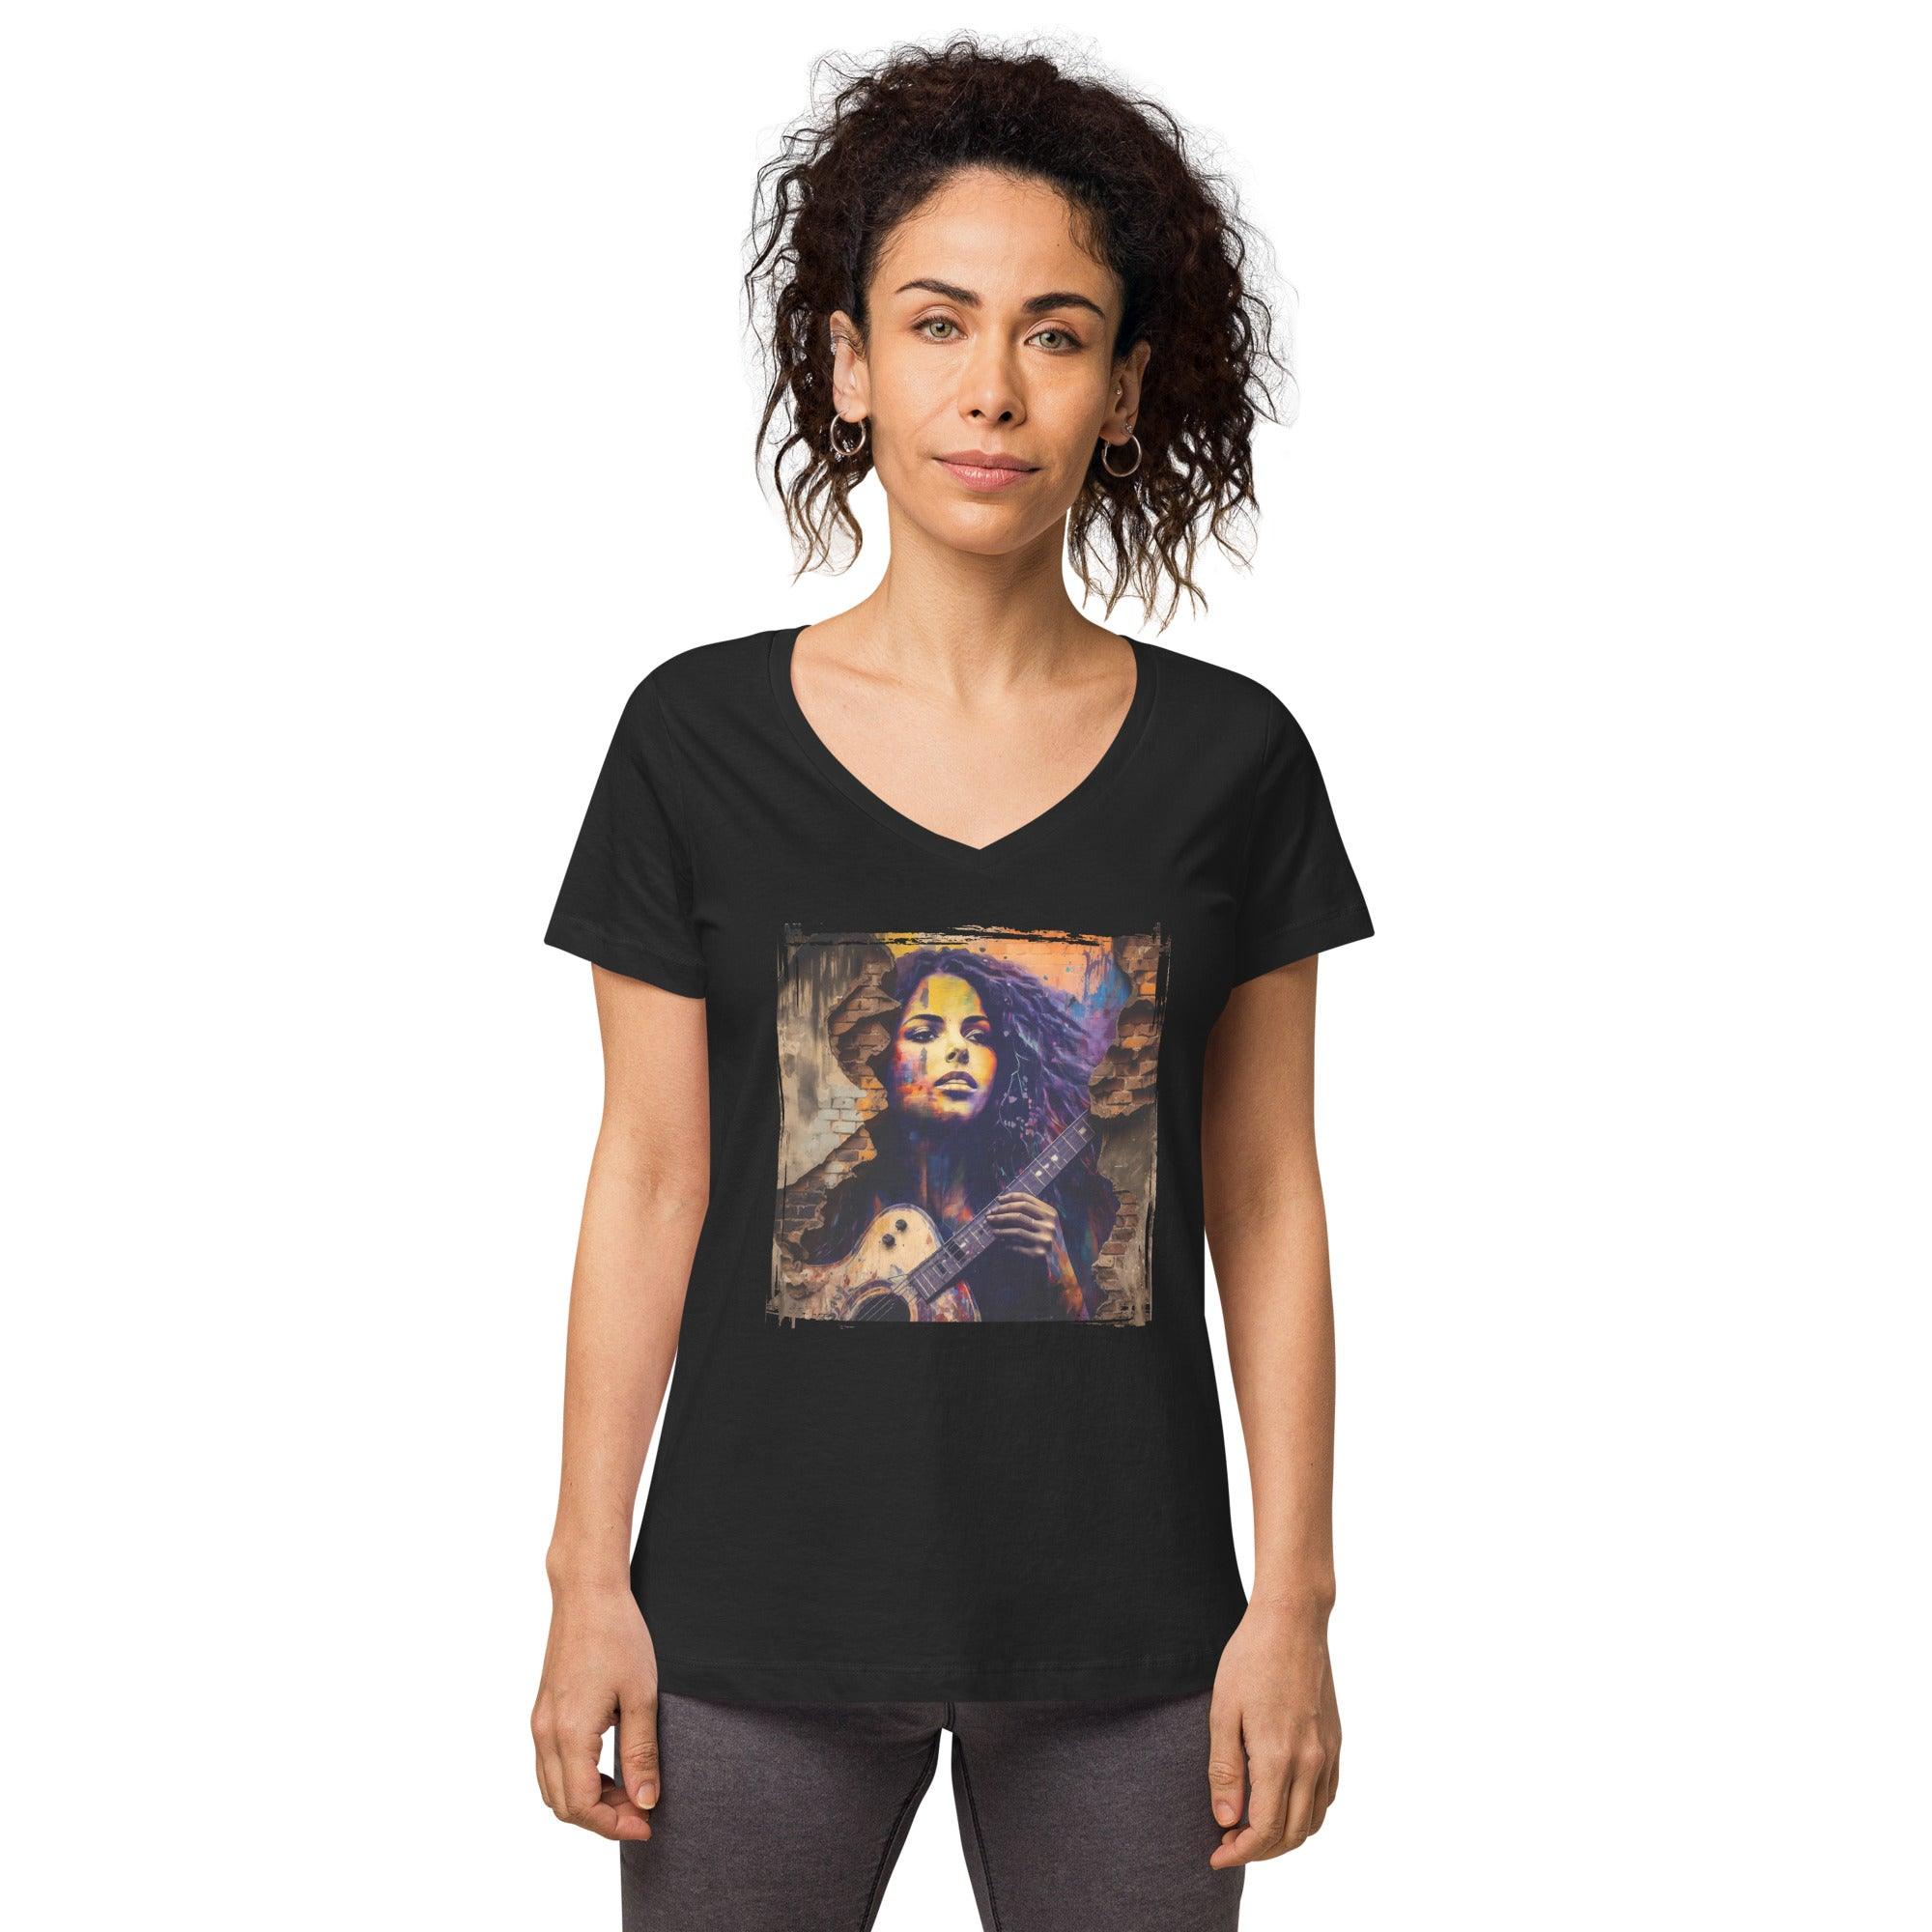 Fingers Dance Guitar Sings Women’s Fitted V-neck T-shirt - Beyond T-shirts